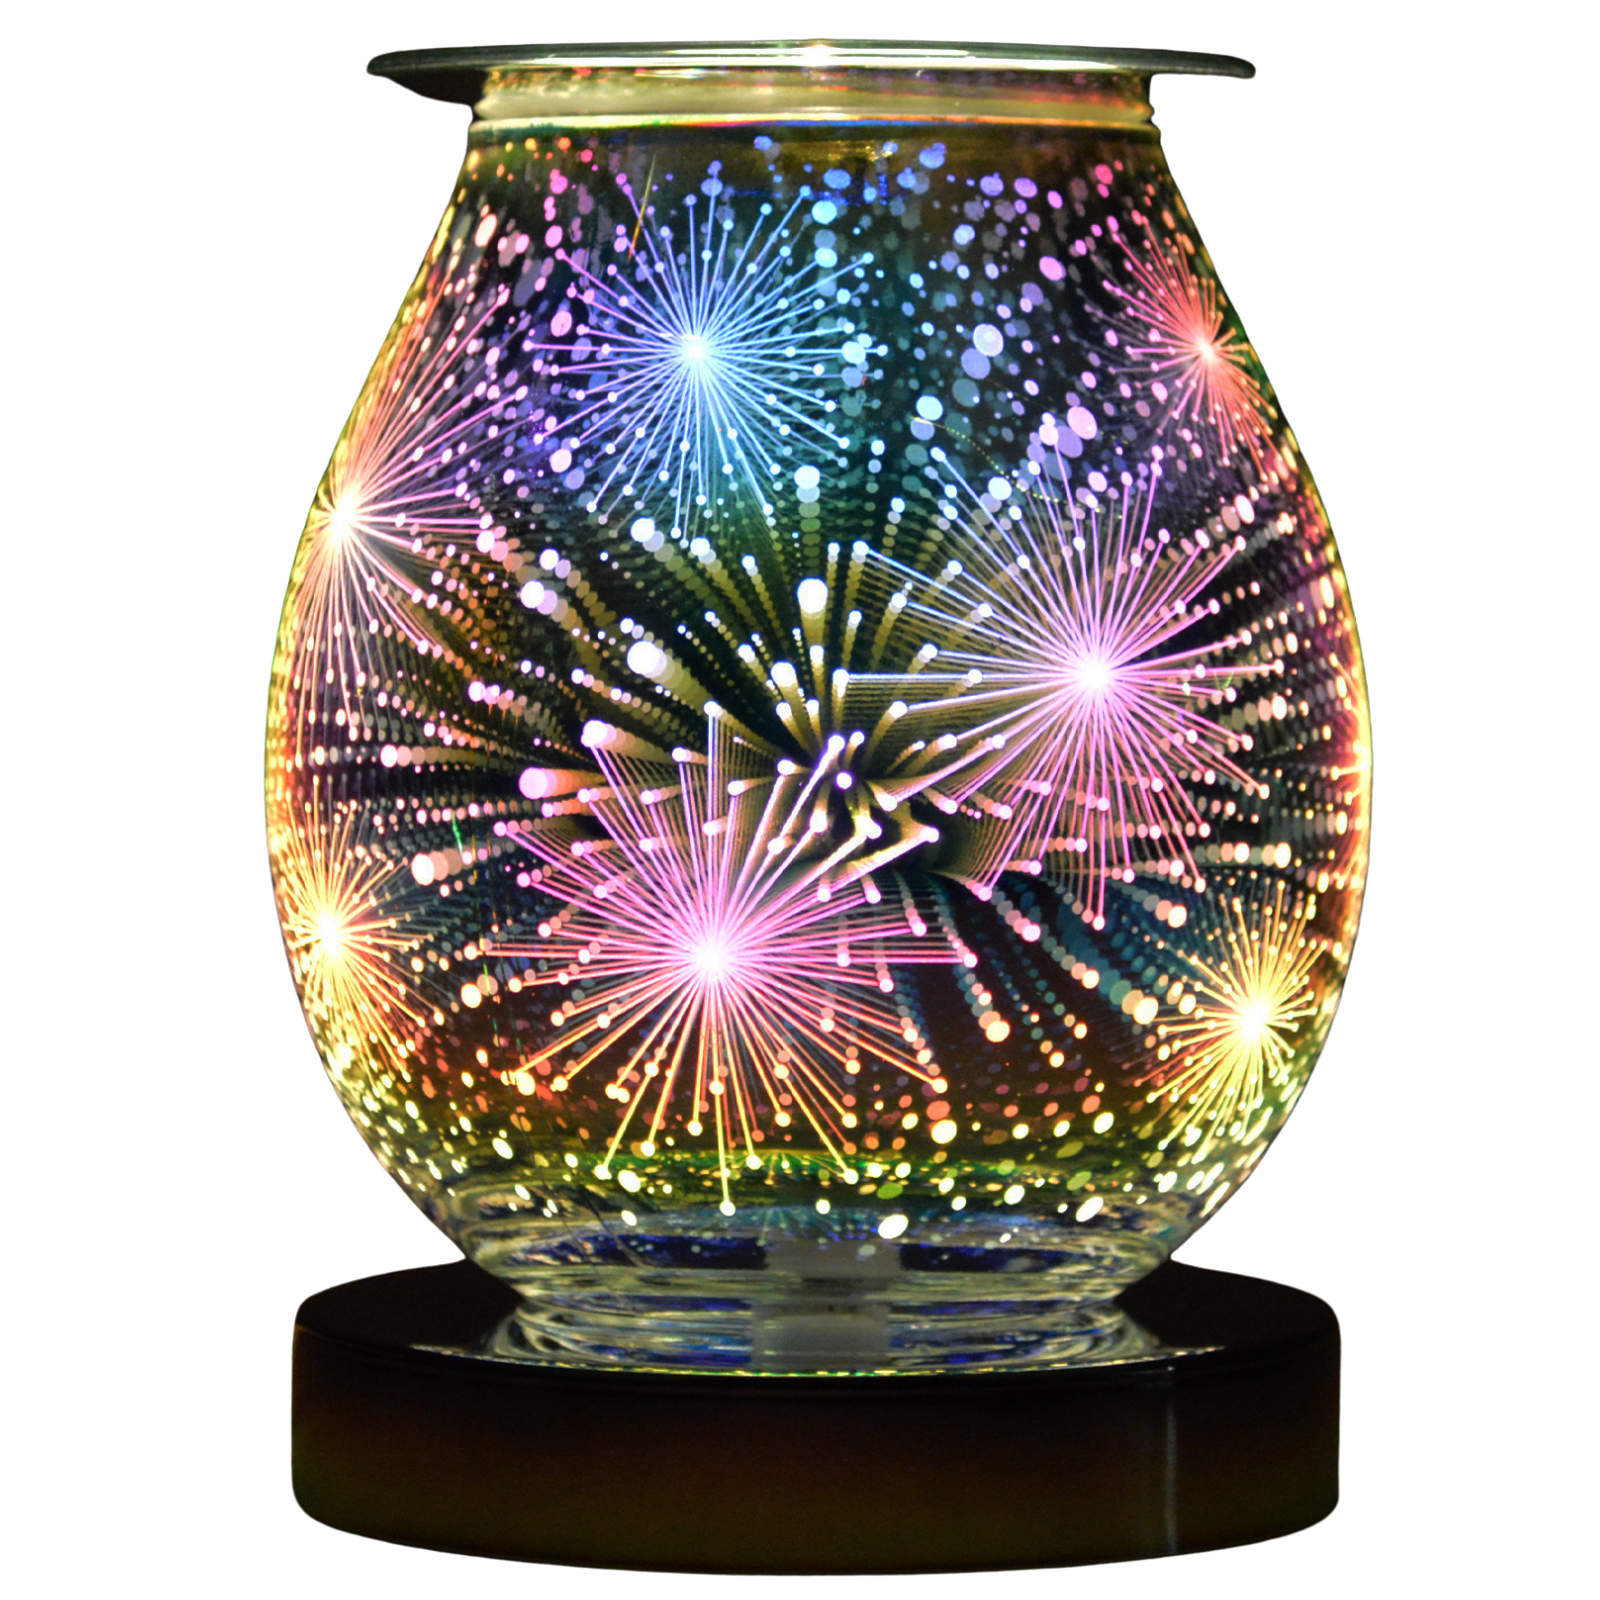 Cello - 3D Touch Electric Wax Burner - Firework